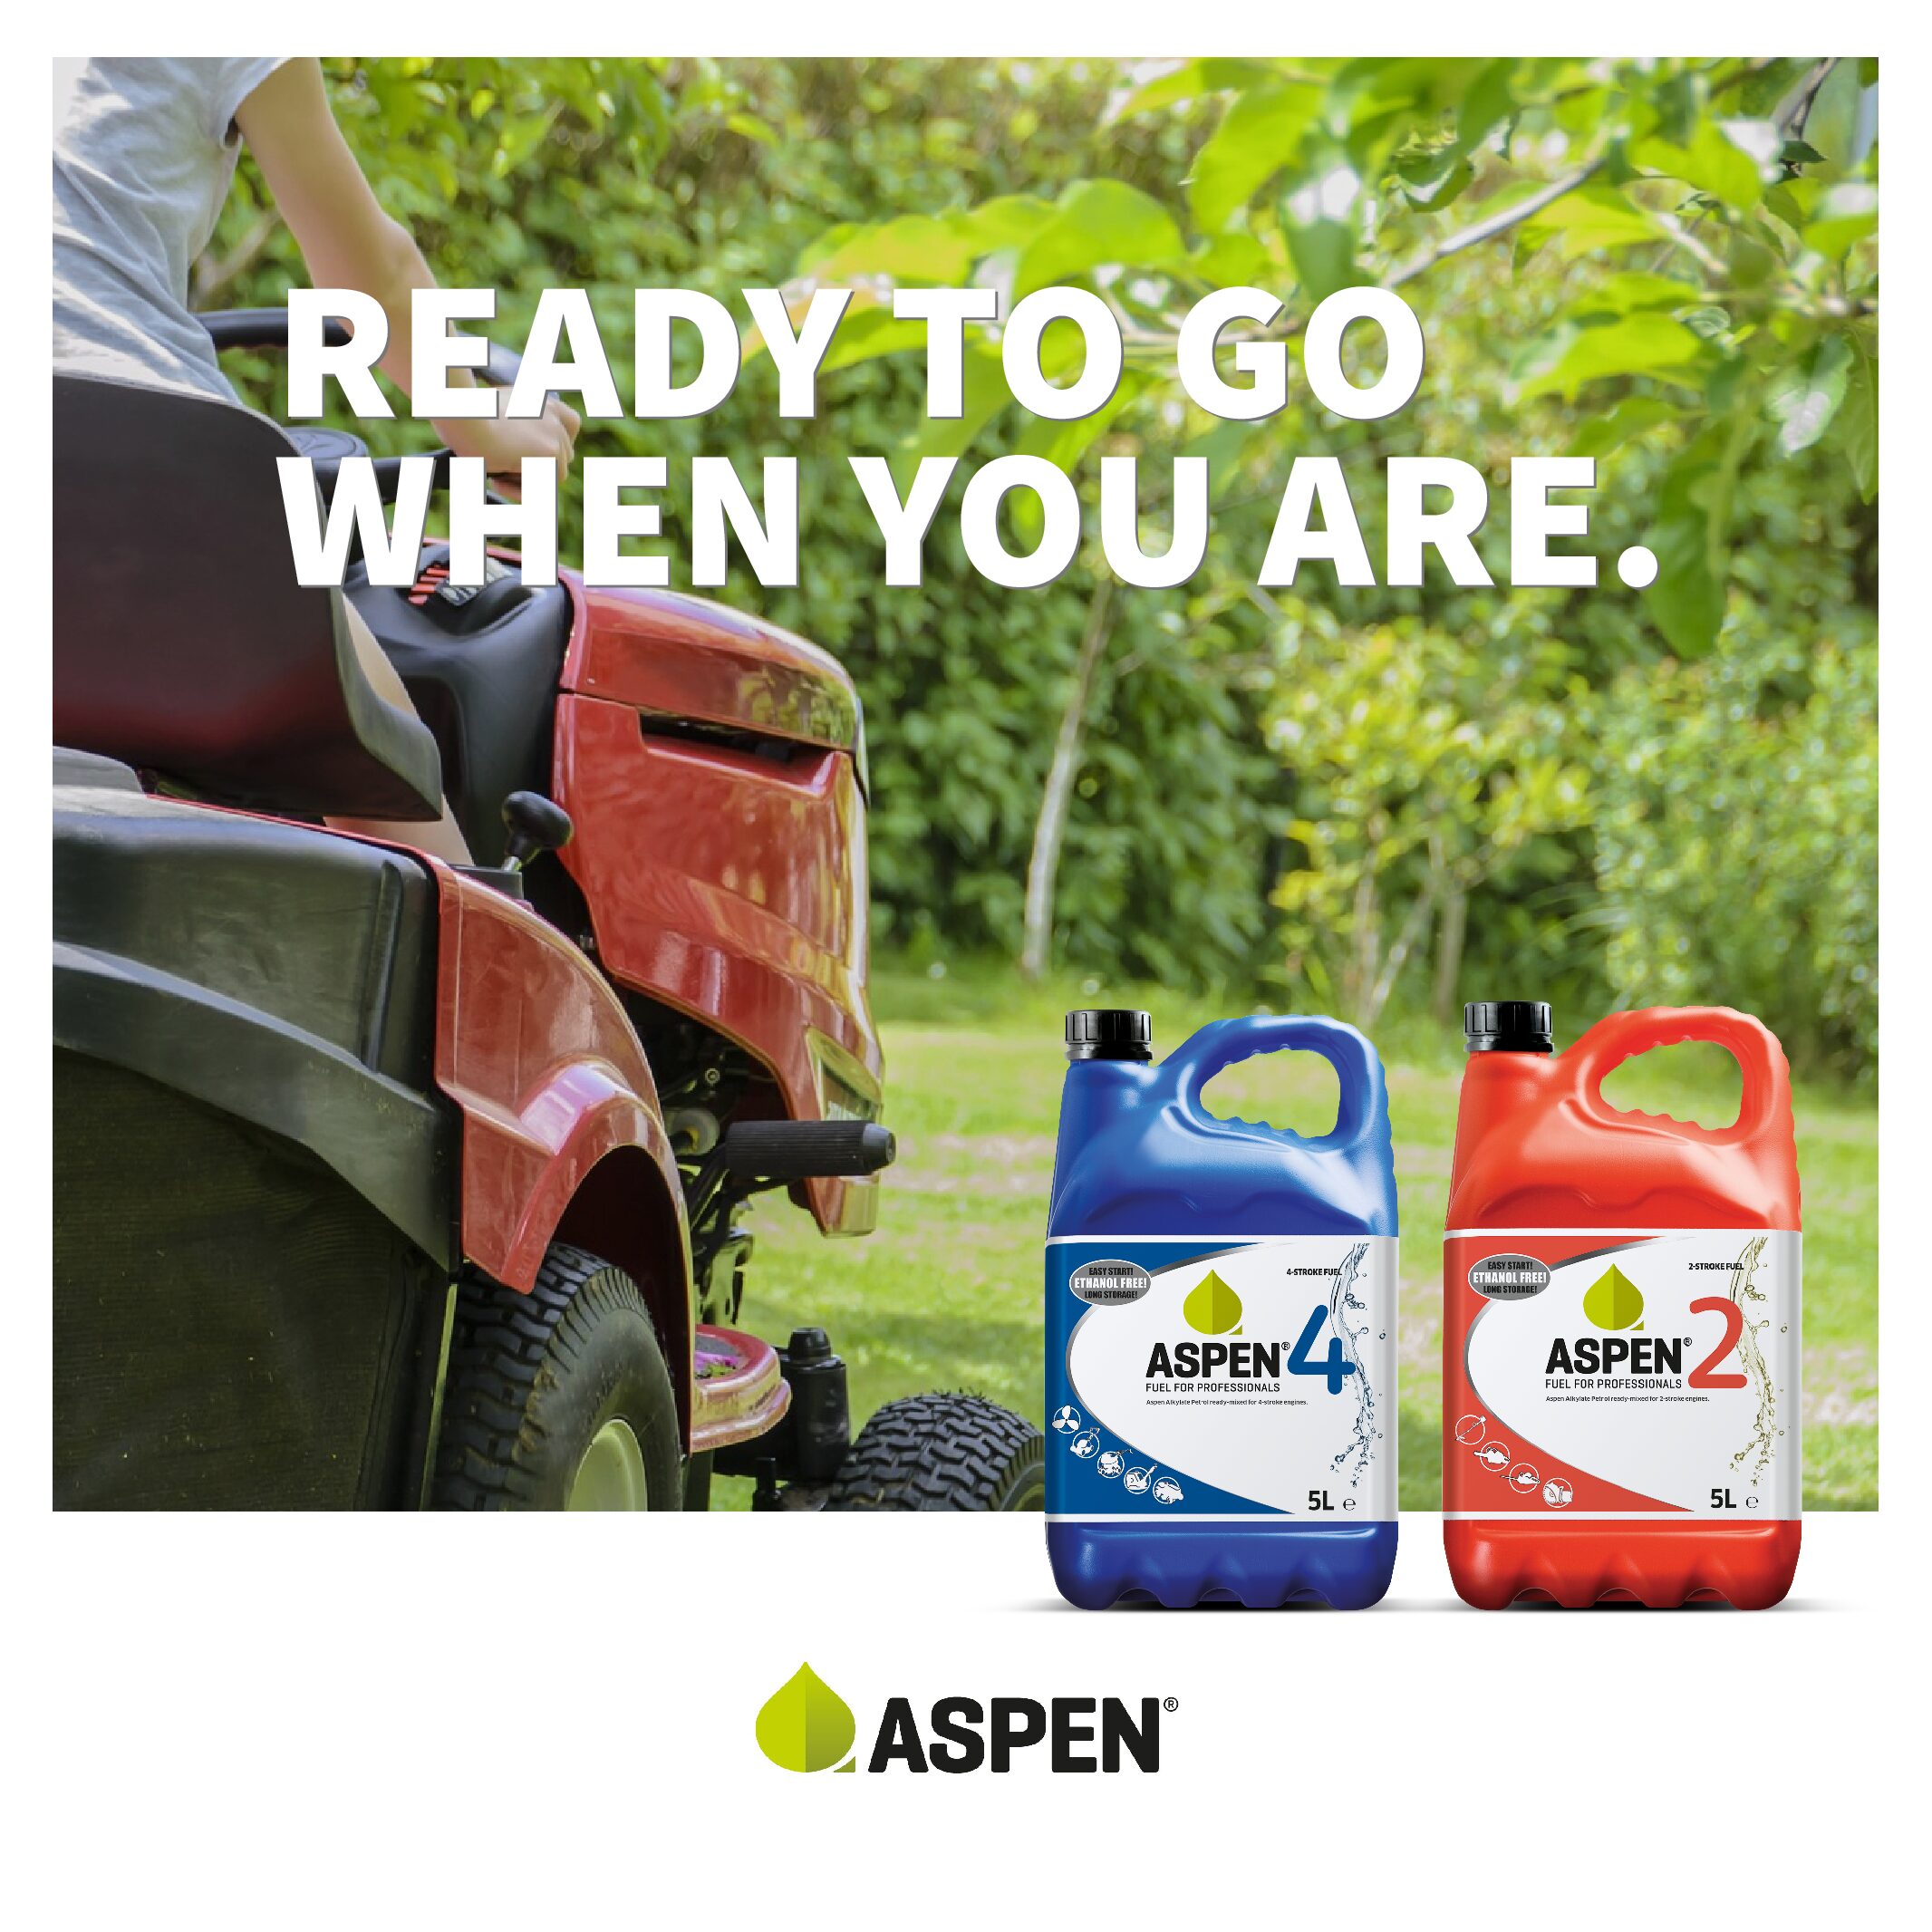 Can you switch to regular petrol after you have used Aspen Fuel?